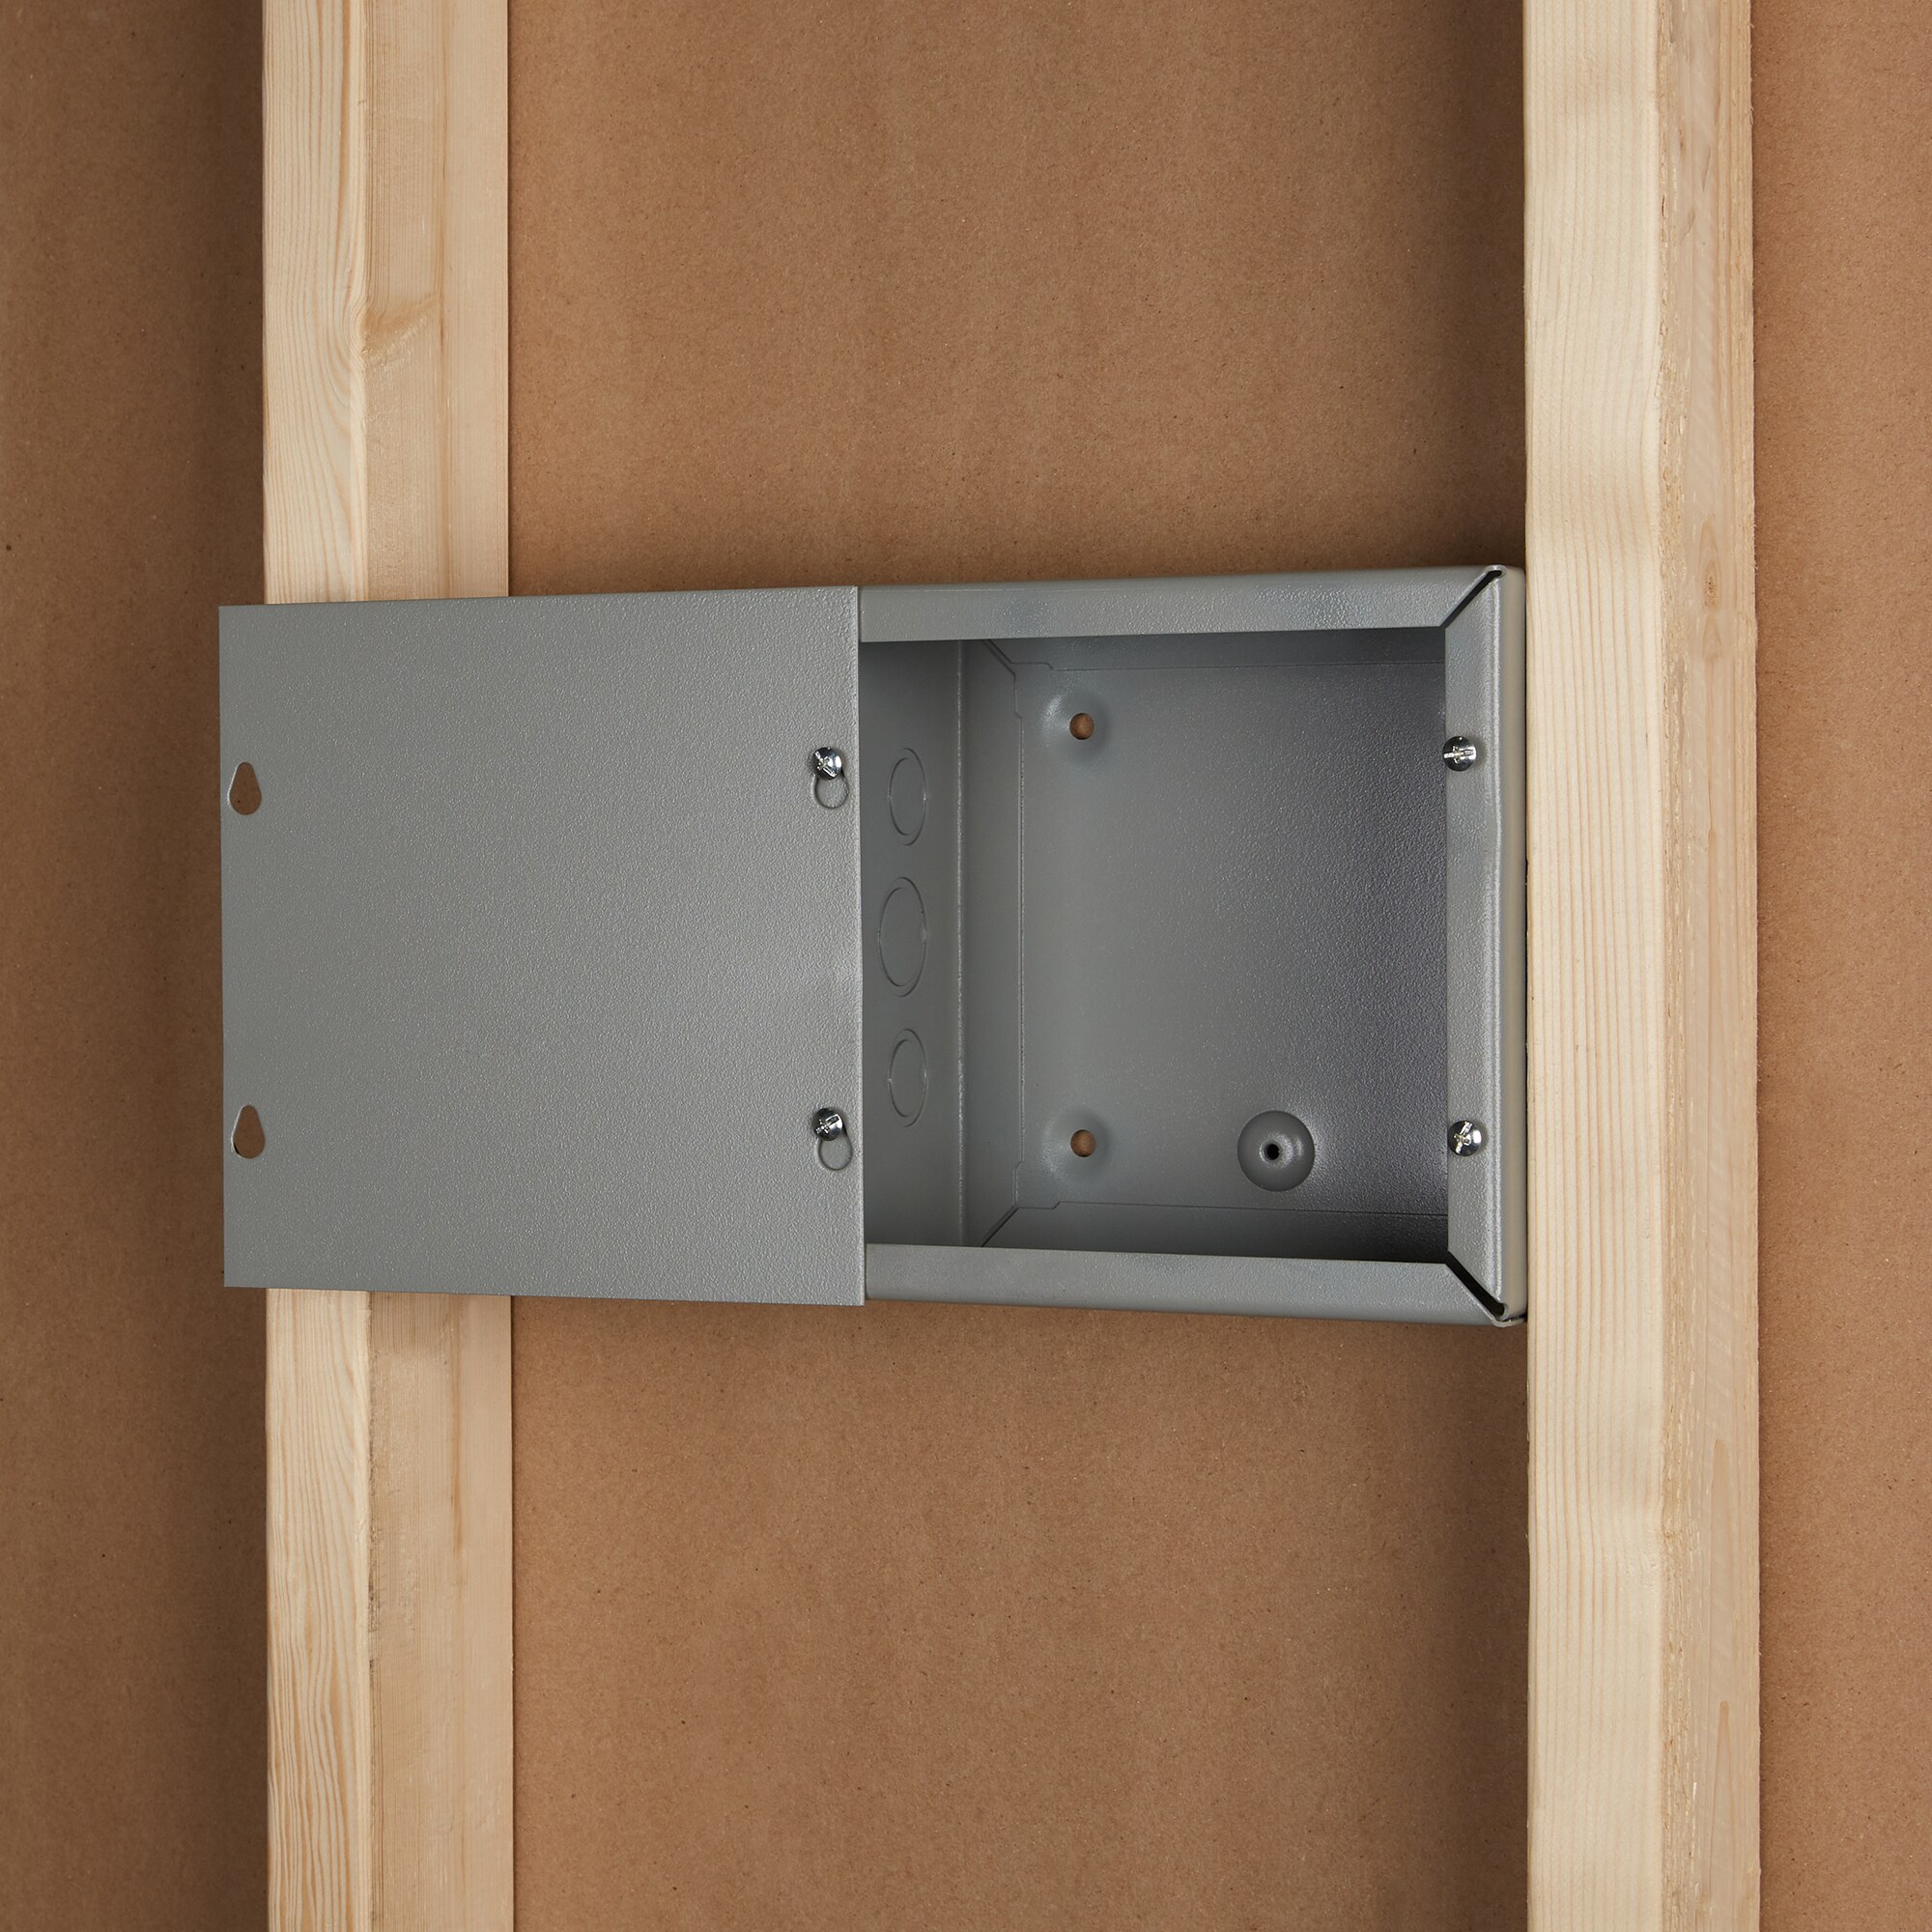 Wiegmann SC121204 SC Series Electrical Enclosure 16 Gauge Steel ANSI 61 Gray Wall Mount Screwed Cover for sale online 